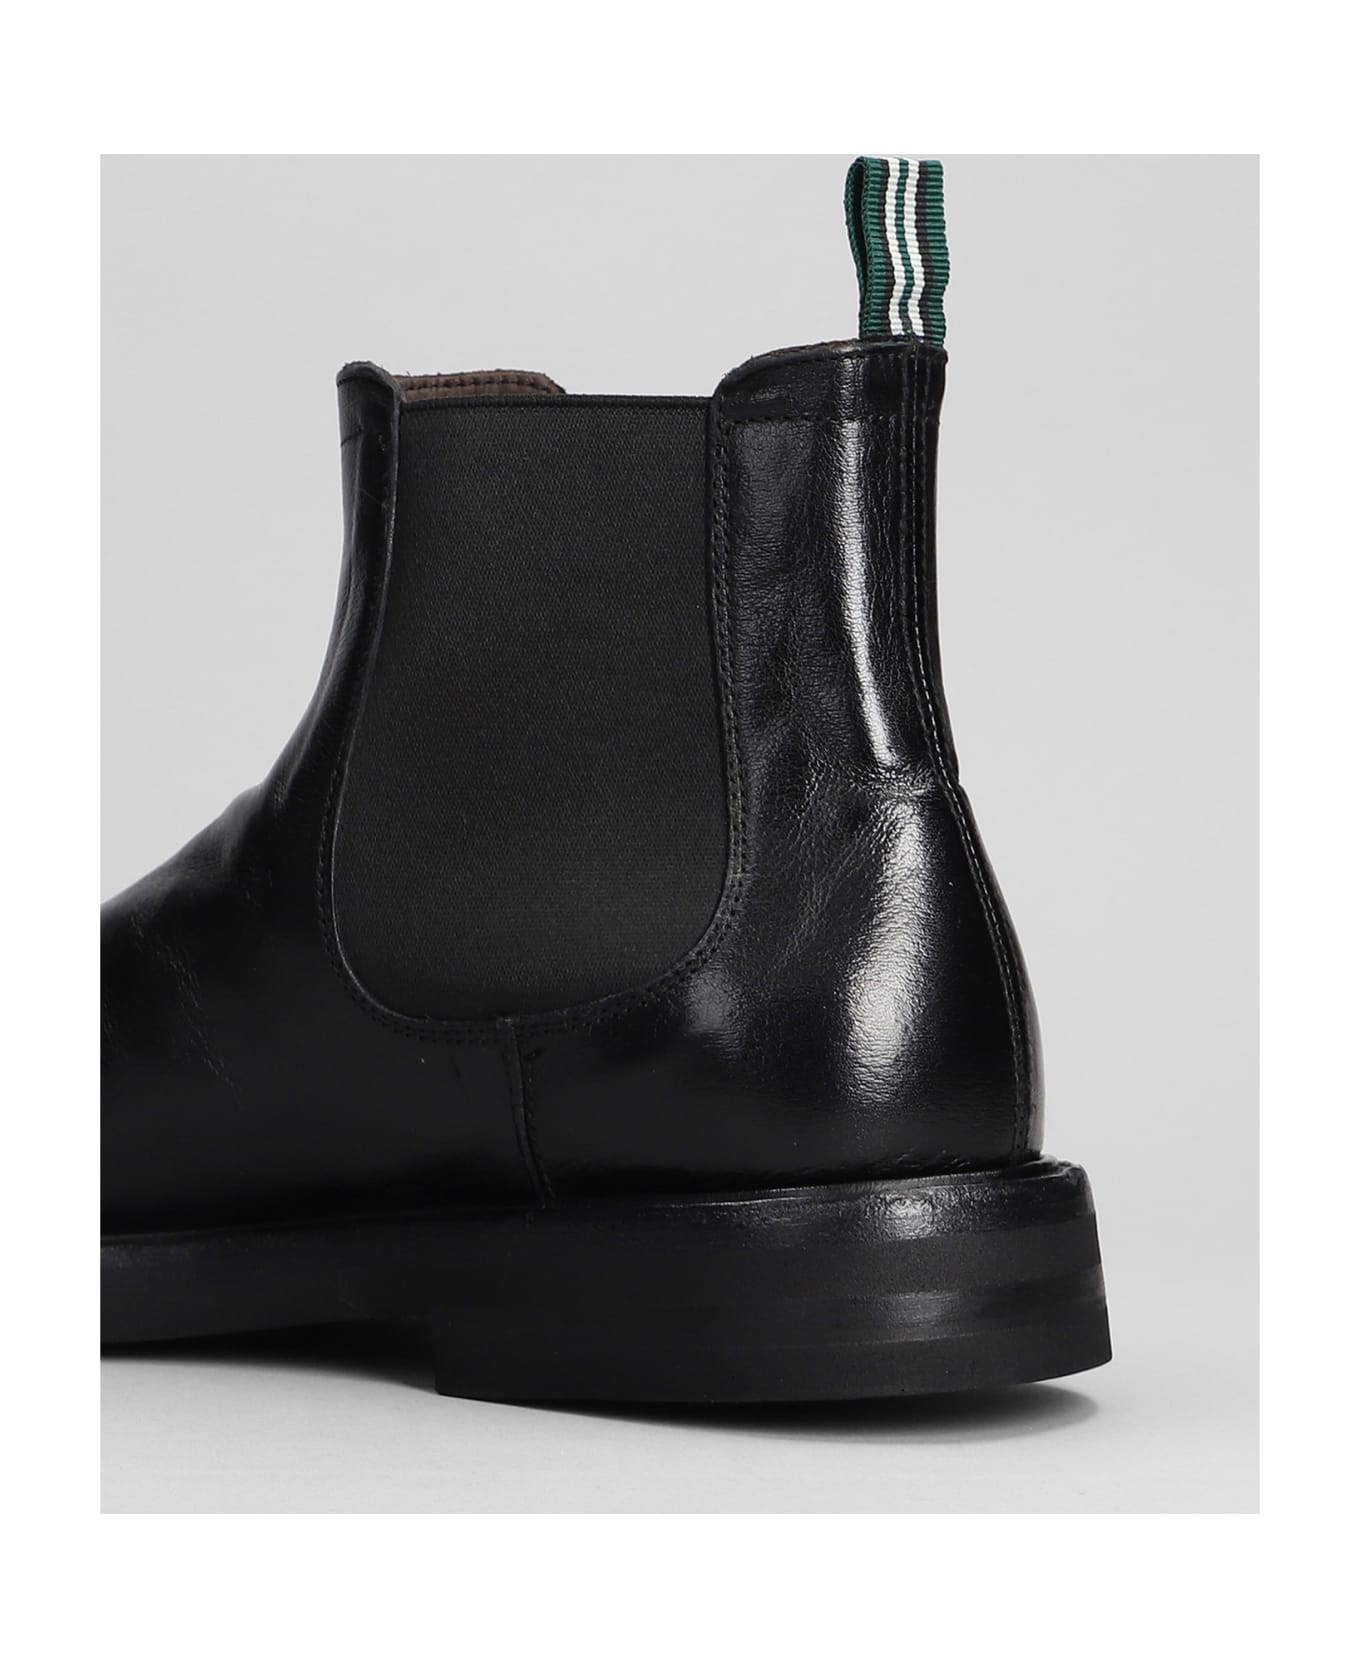 Green George Low Heels Ankle Boots In verdes Leather - verdes